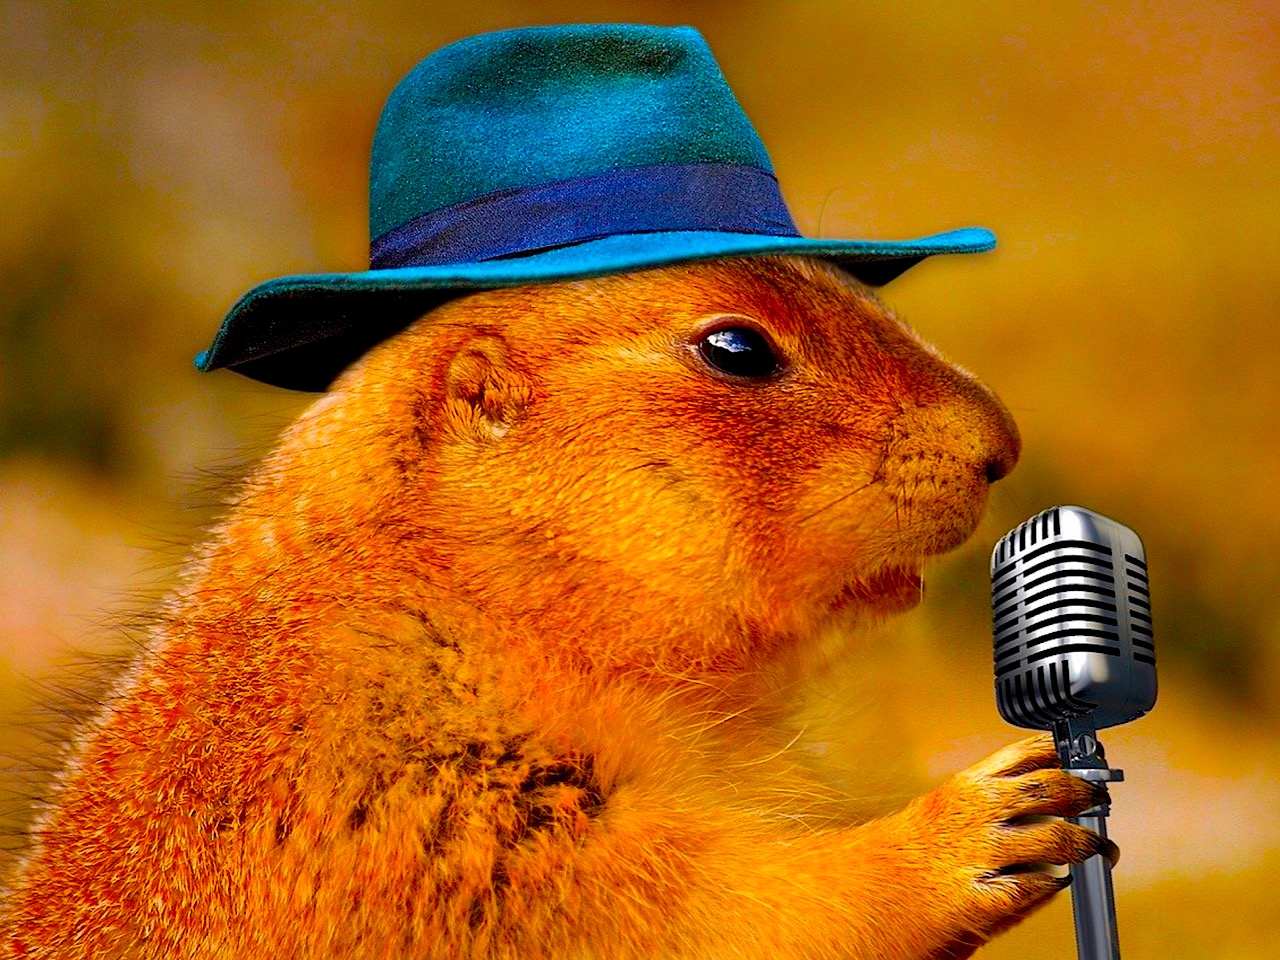 A prairie dog with a blue hat singing at a microphone